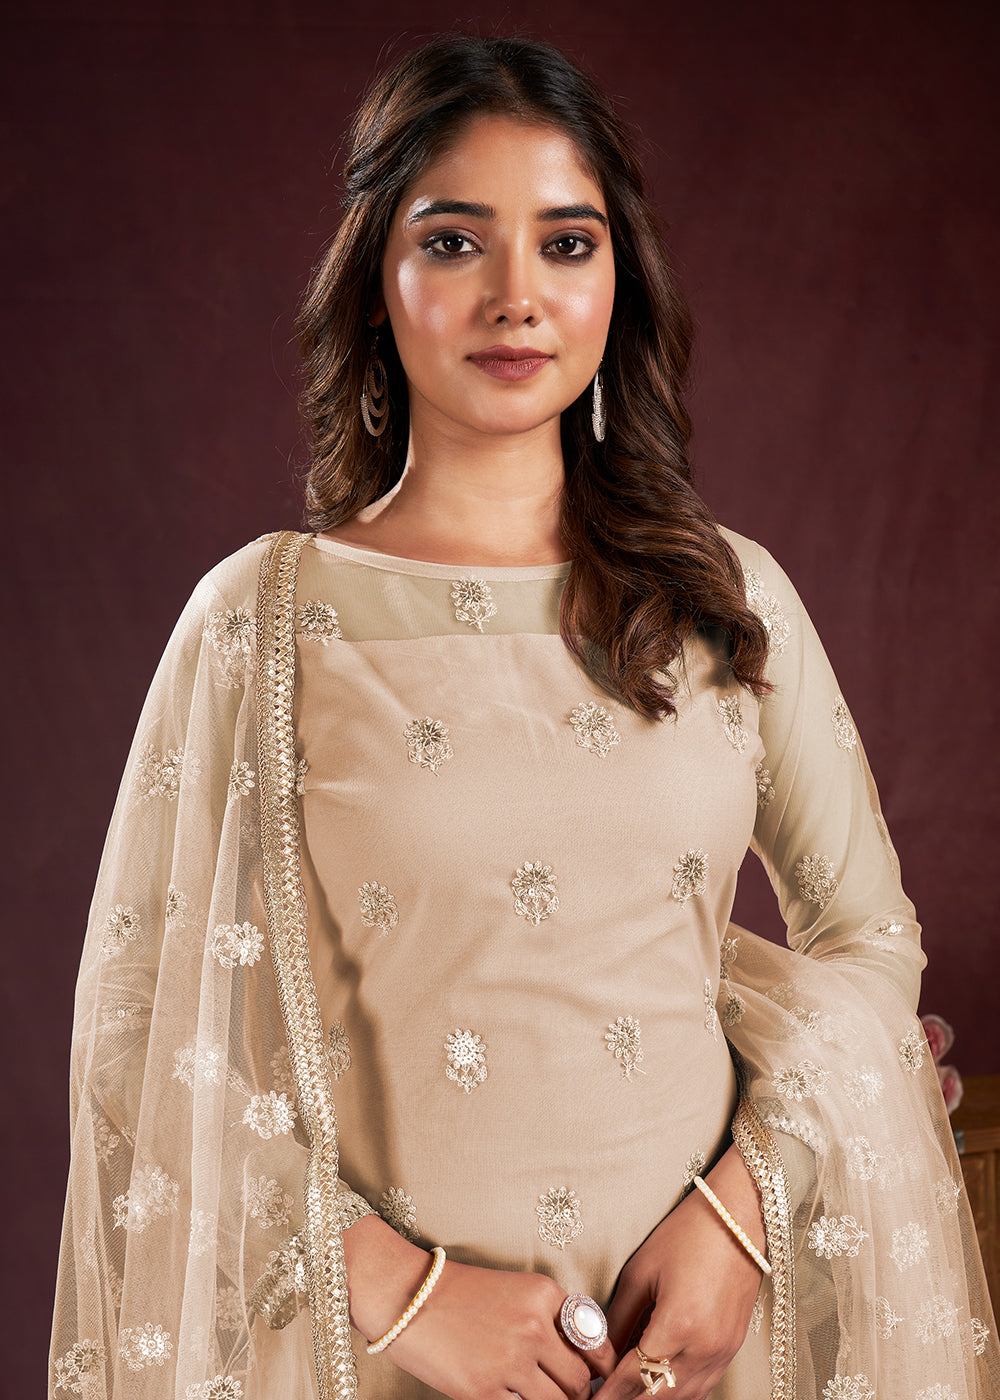 Buy Now Dusty Beige Butterfly Net Embroidered Festive Salwar Suit Online in USA, UK, Canada, Germany, Australia & Worldwide at Empress Clothing.